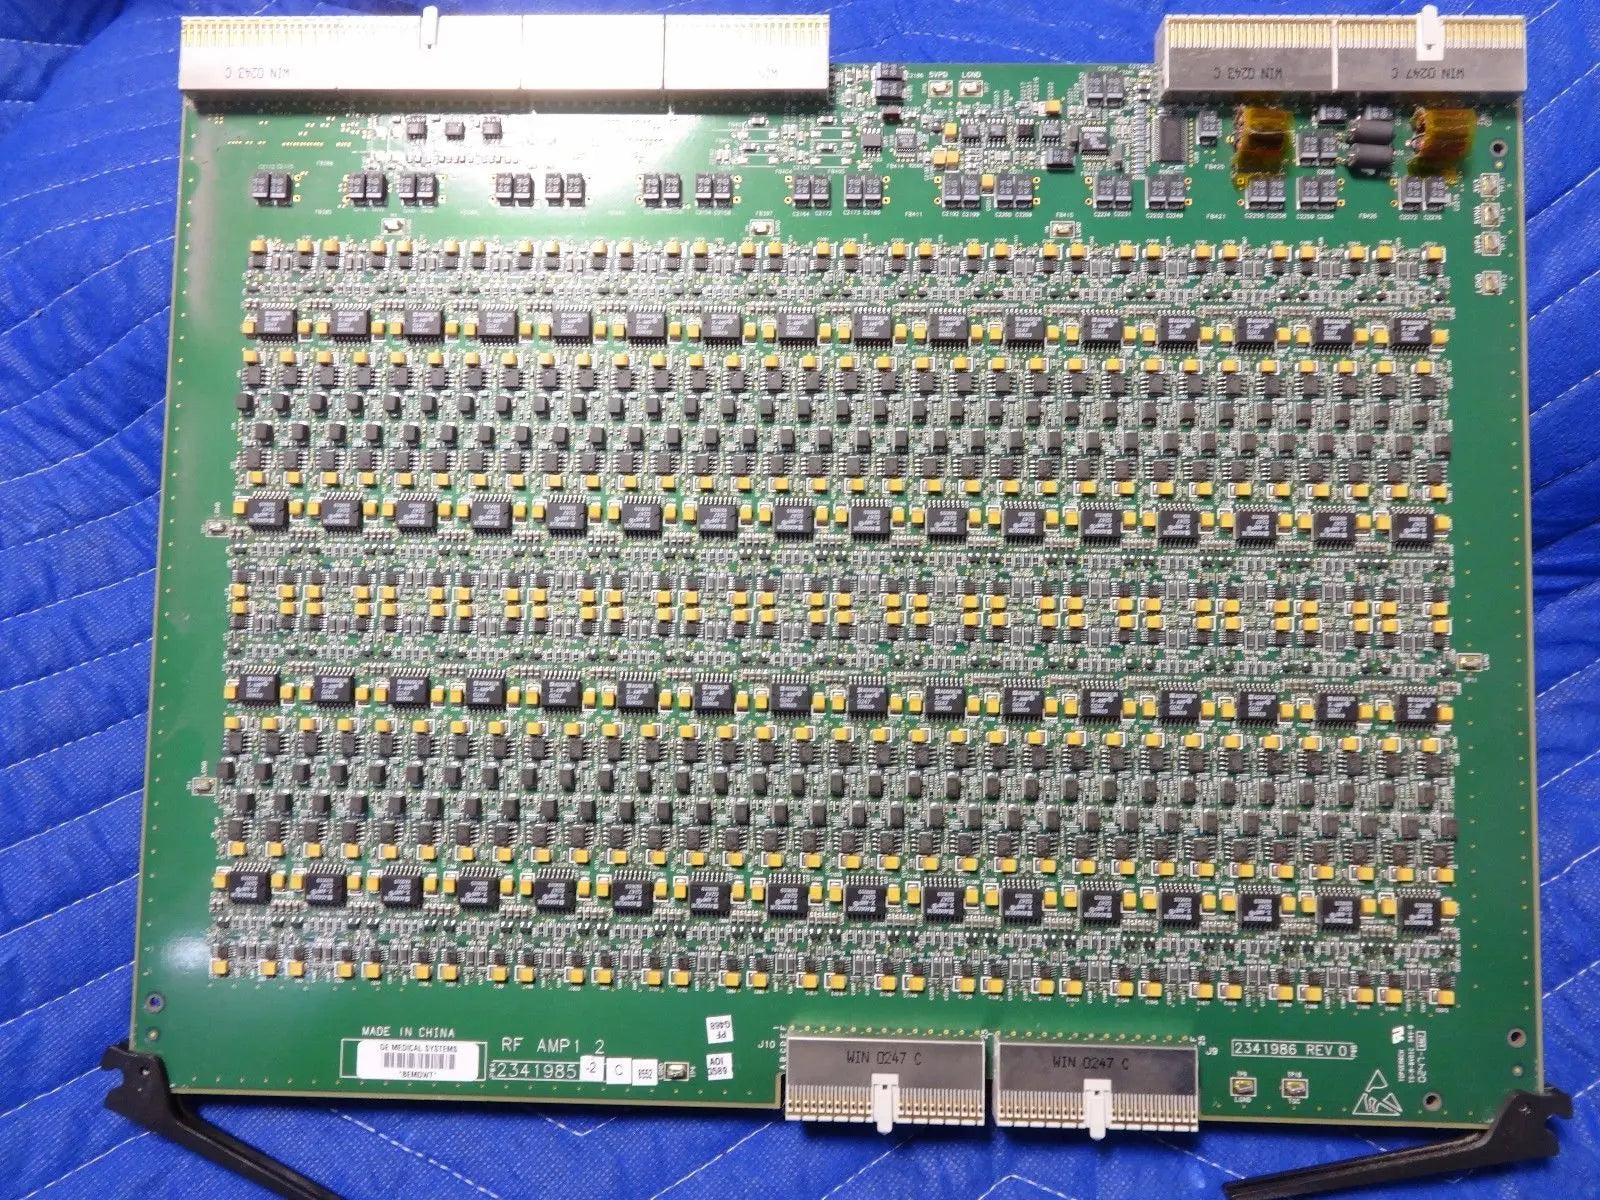 RF AMP1_2 Radio Frequency Amplifier Board 2341985-2 C for GELogiq 9 Ultrasound DIAGNOSTIC ULTRASOUND MACHINES FOR SALE